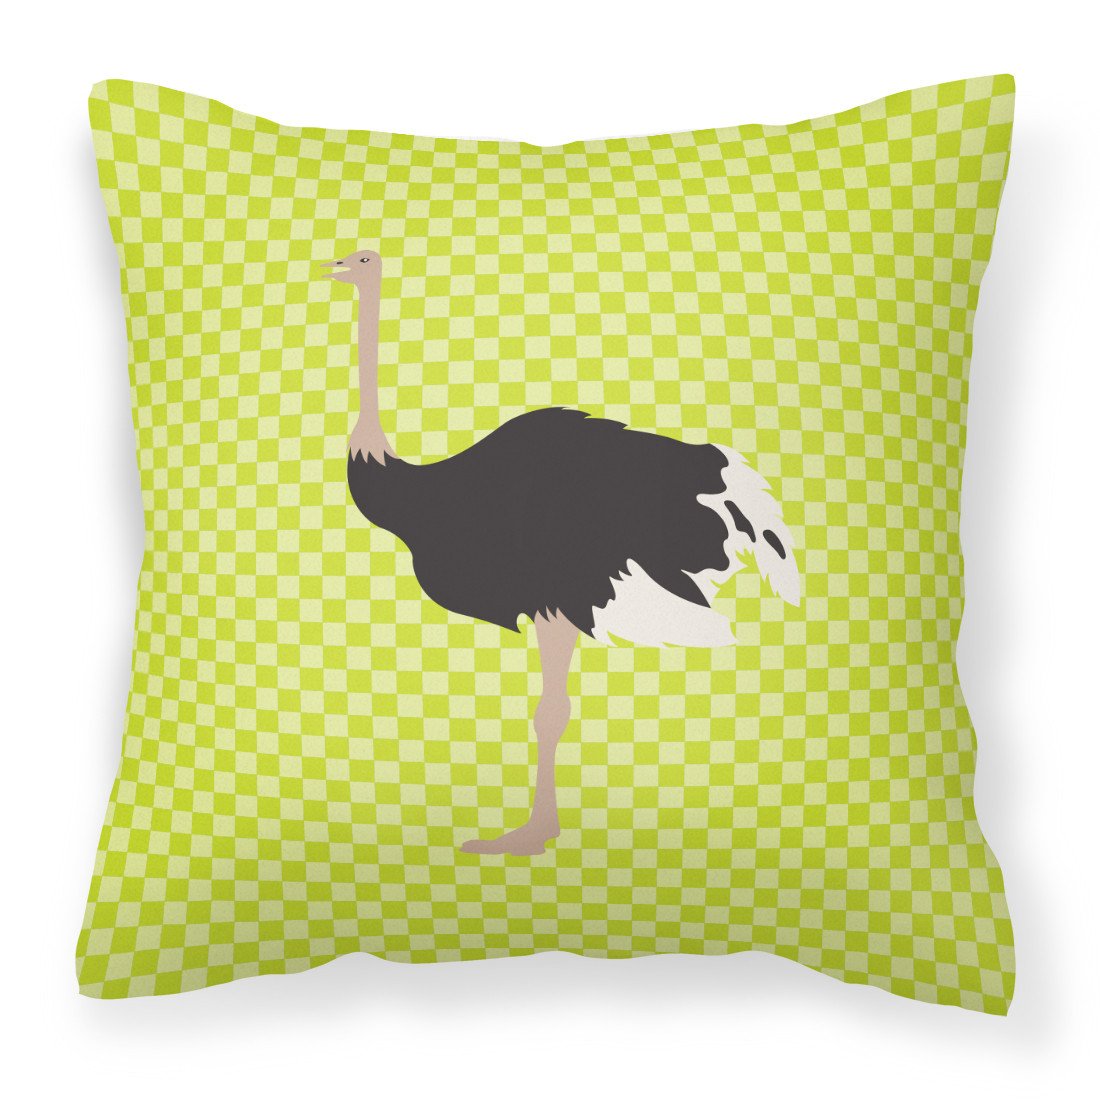 Common Ostrich Green Fabric Decorative Pillow BB7750PW1818 by Caroline's Treasures